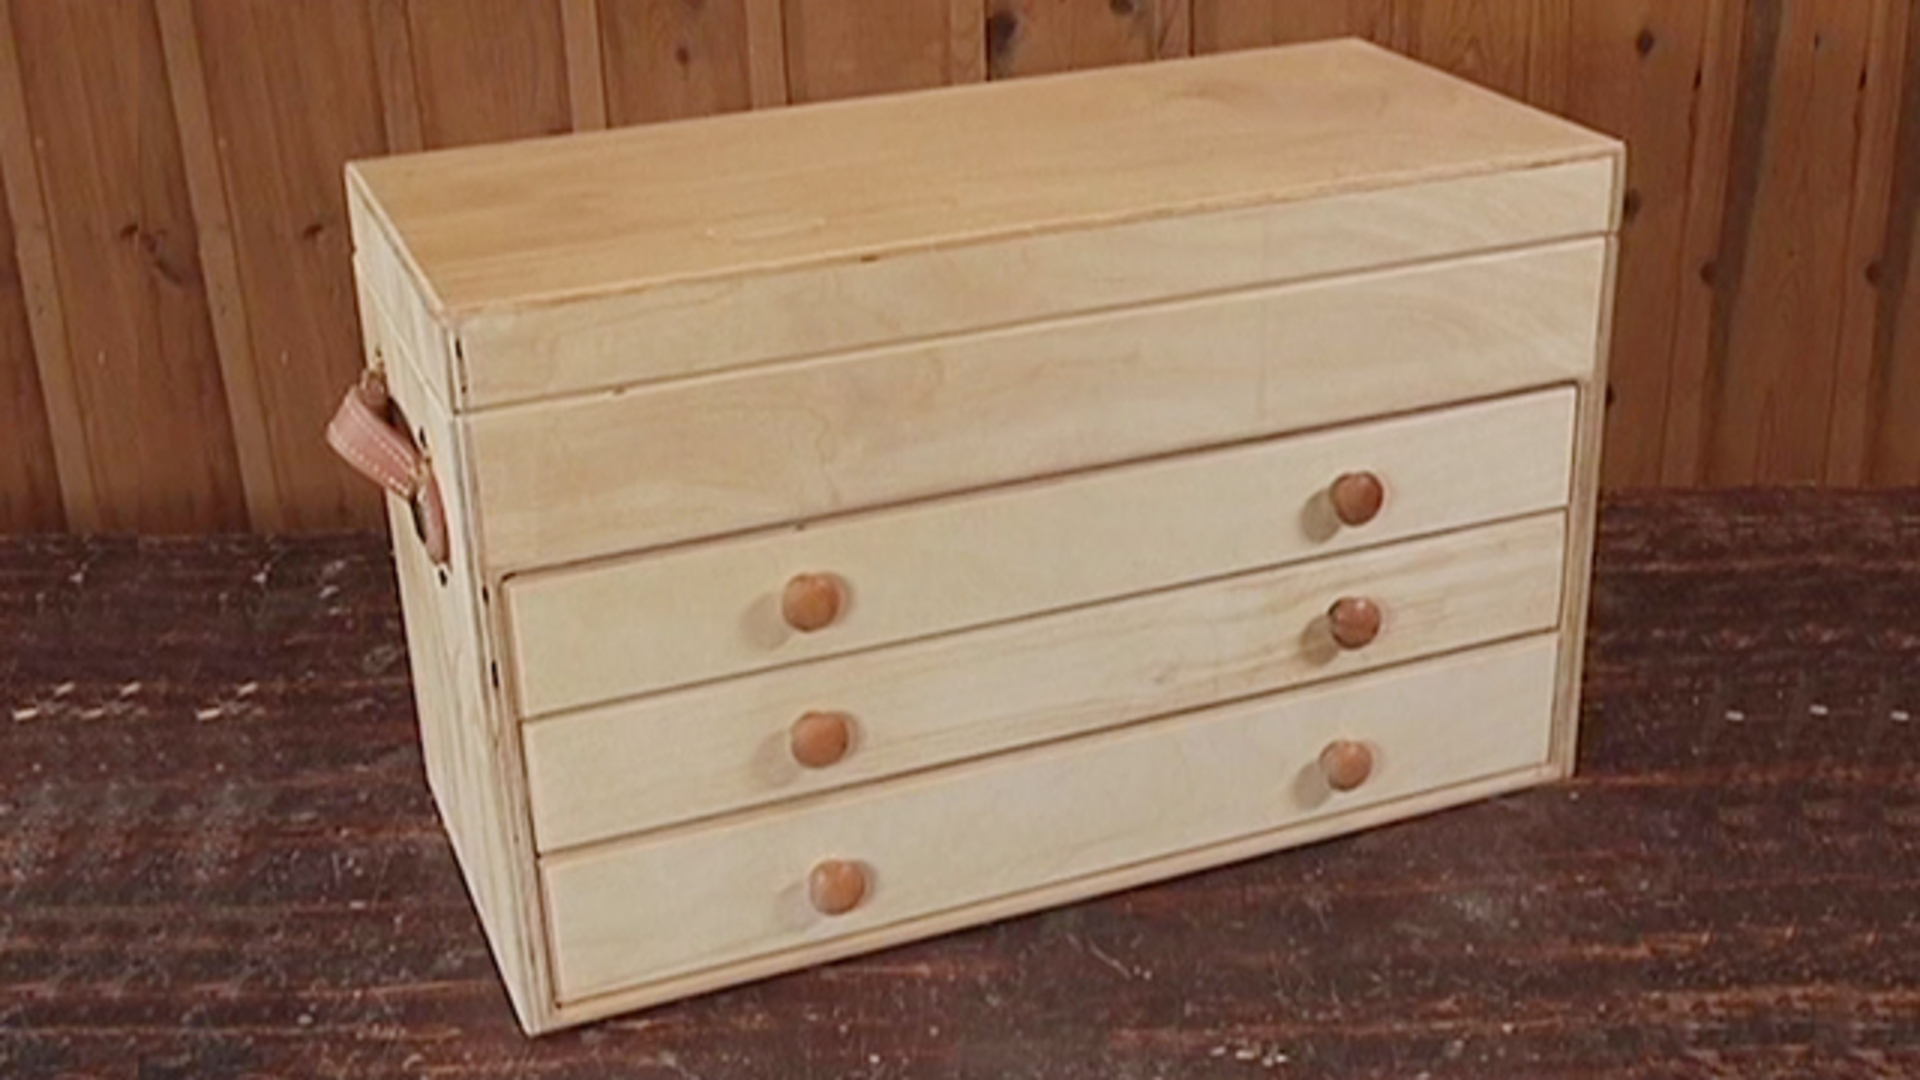 Build a Classic Wooden Tool Chest, Plans & Video